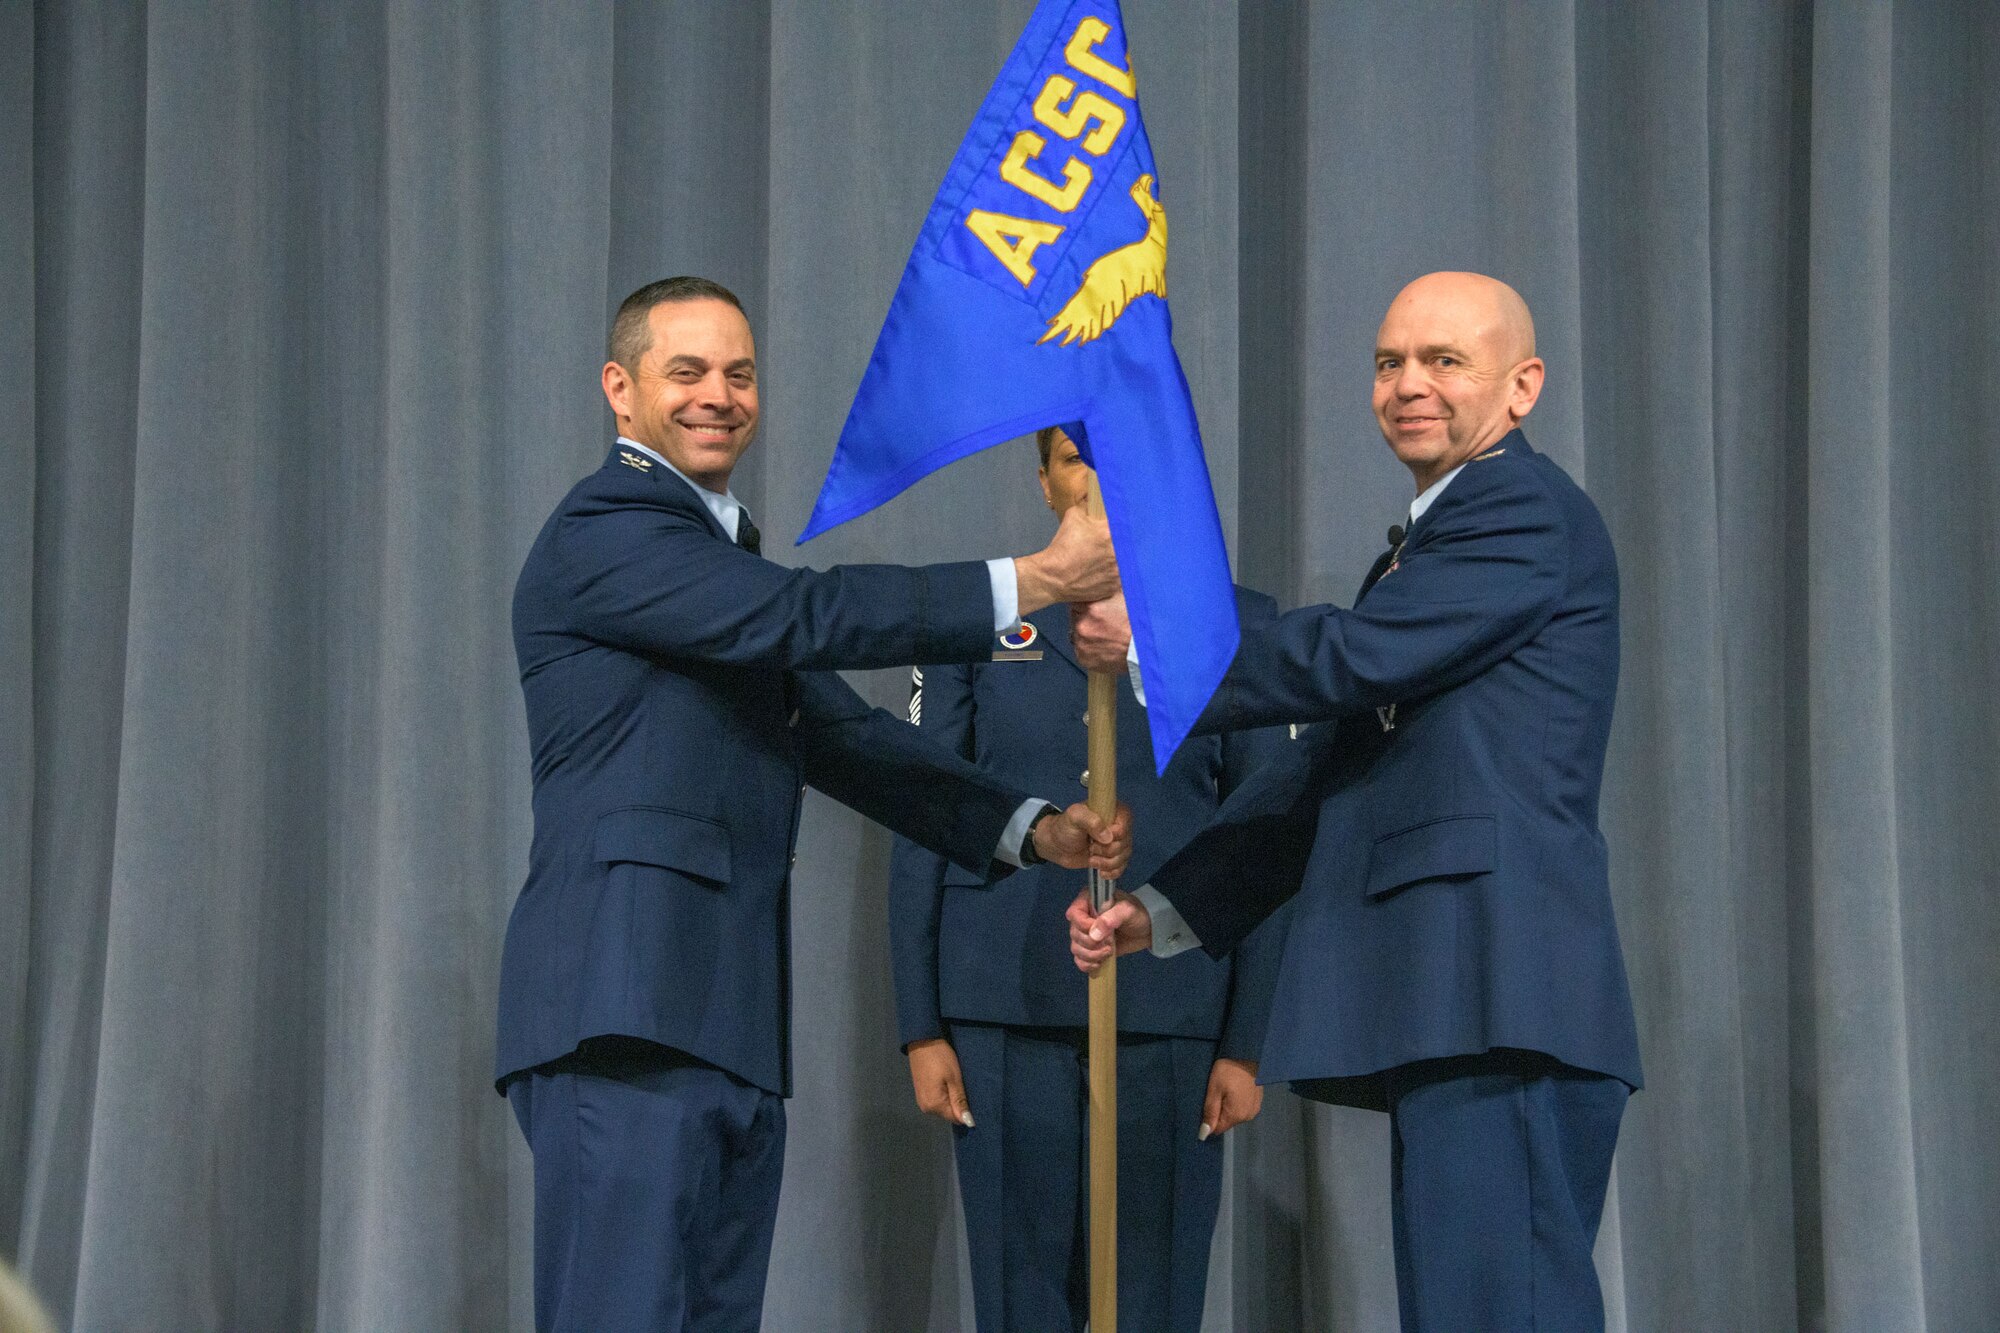 Col. Lee Gentile, left, commandant of Air Command and Staff College, hands the unit flag for the newly activated Global College of Professional Military Education to Col. Craig Ramsey during an activation and assumption of command ceremony April 1, 2022, Maxwell Air Force Base, Ala. Ramsey serves as the first commandant of the college, which falls under ACSC and is responsible for providing online PME courses to more than 30,000 students. (U.S. Air Force photo by Trey Ward)